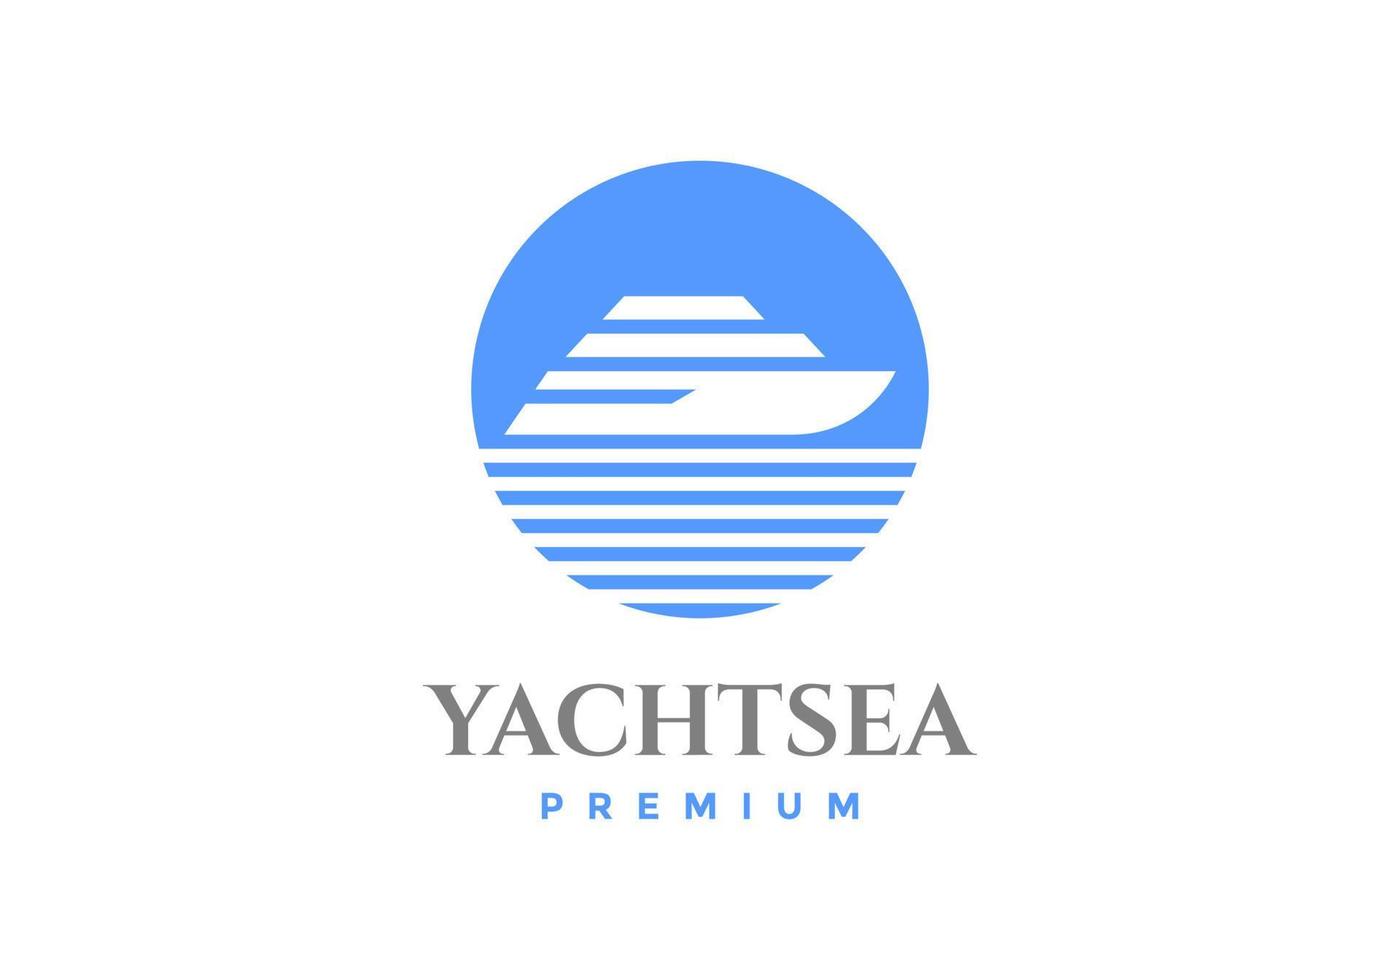 Circle and ship logos are suitable for cruise ship companies. vector